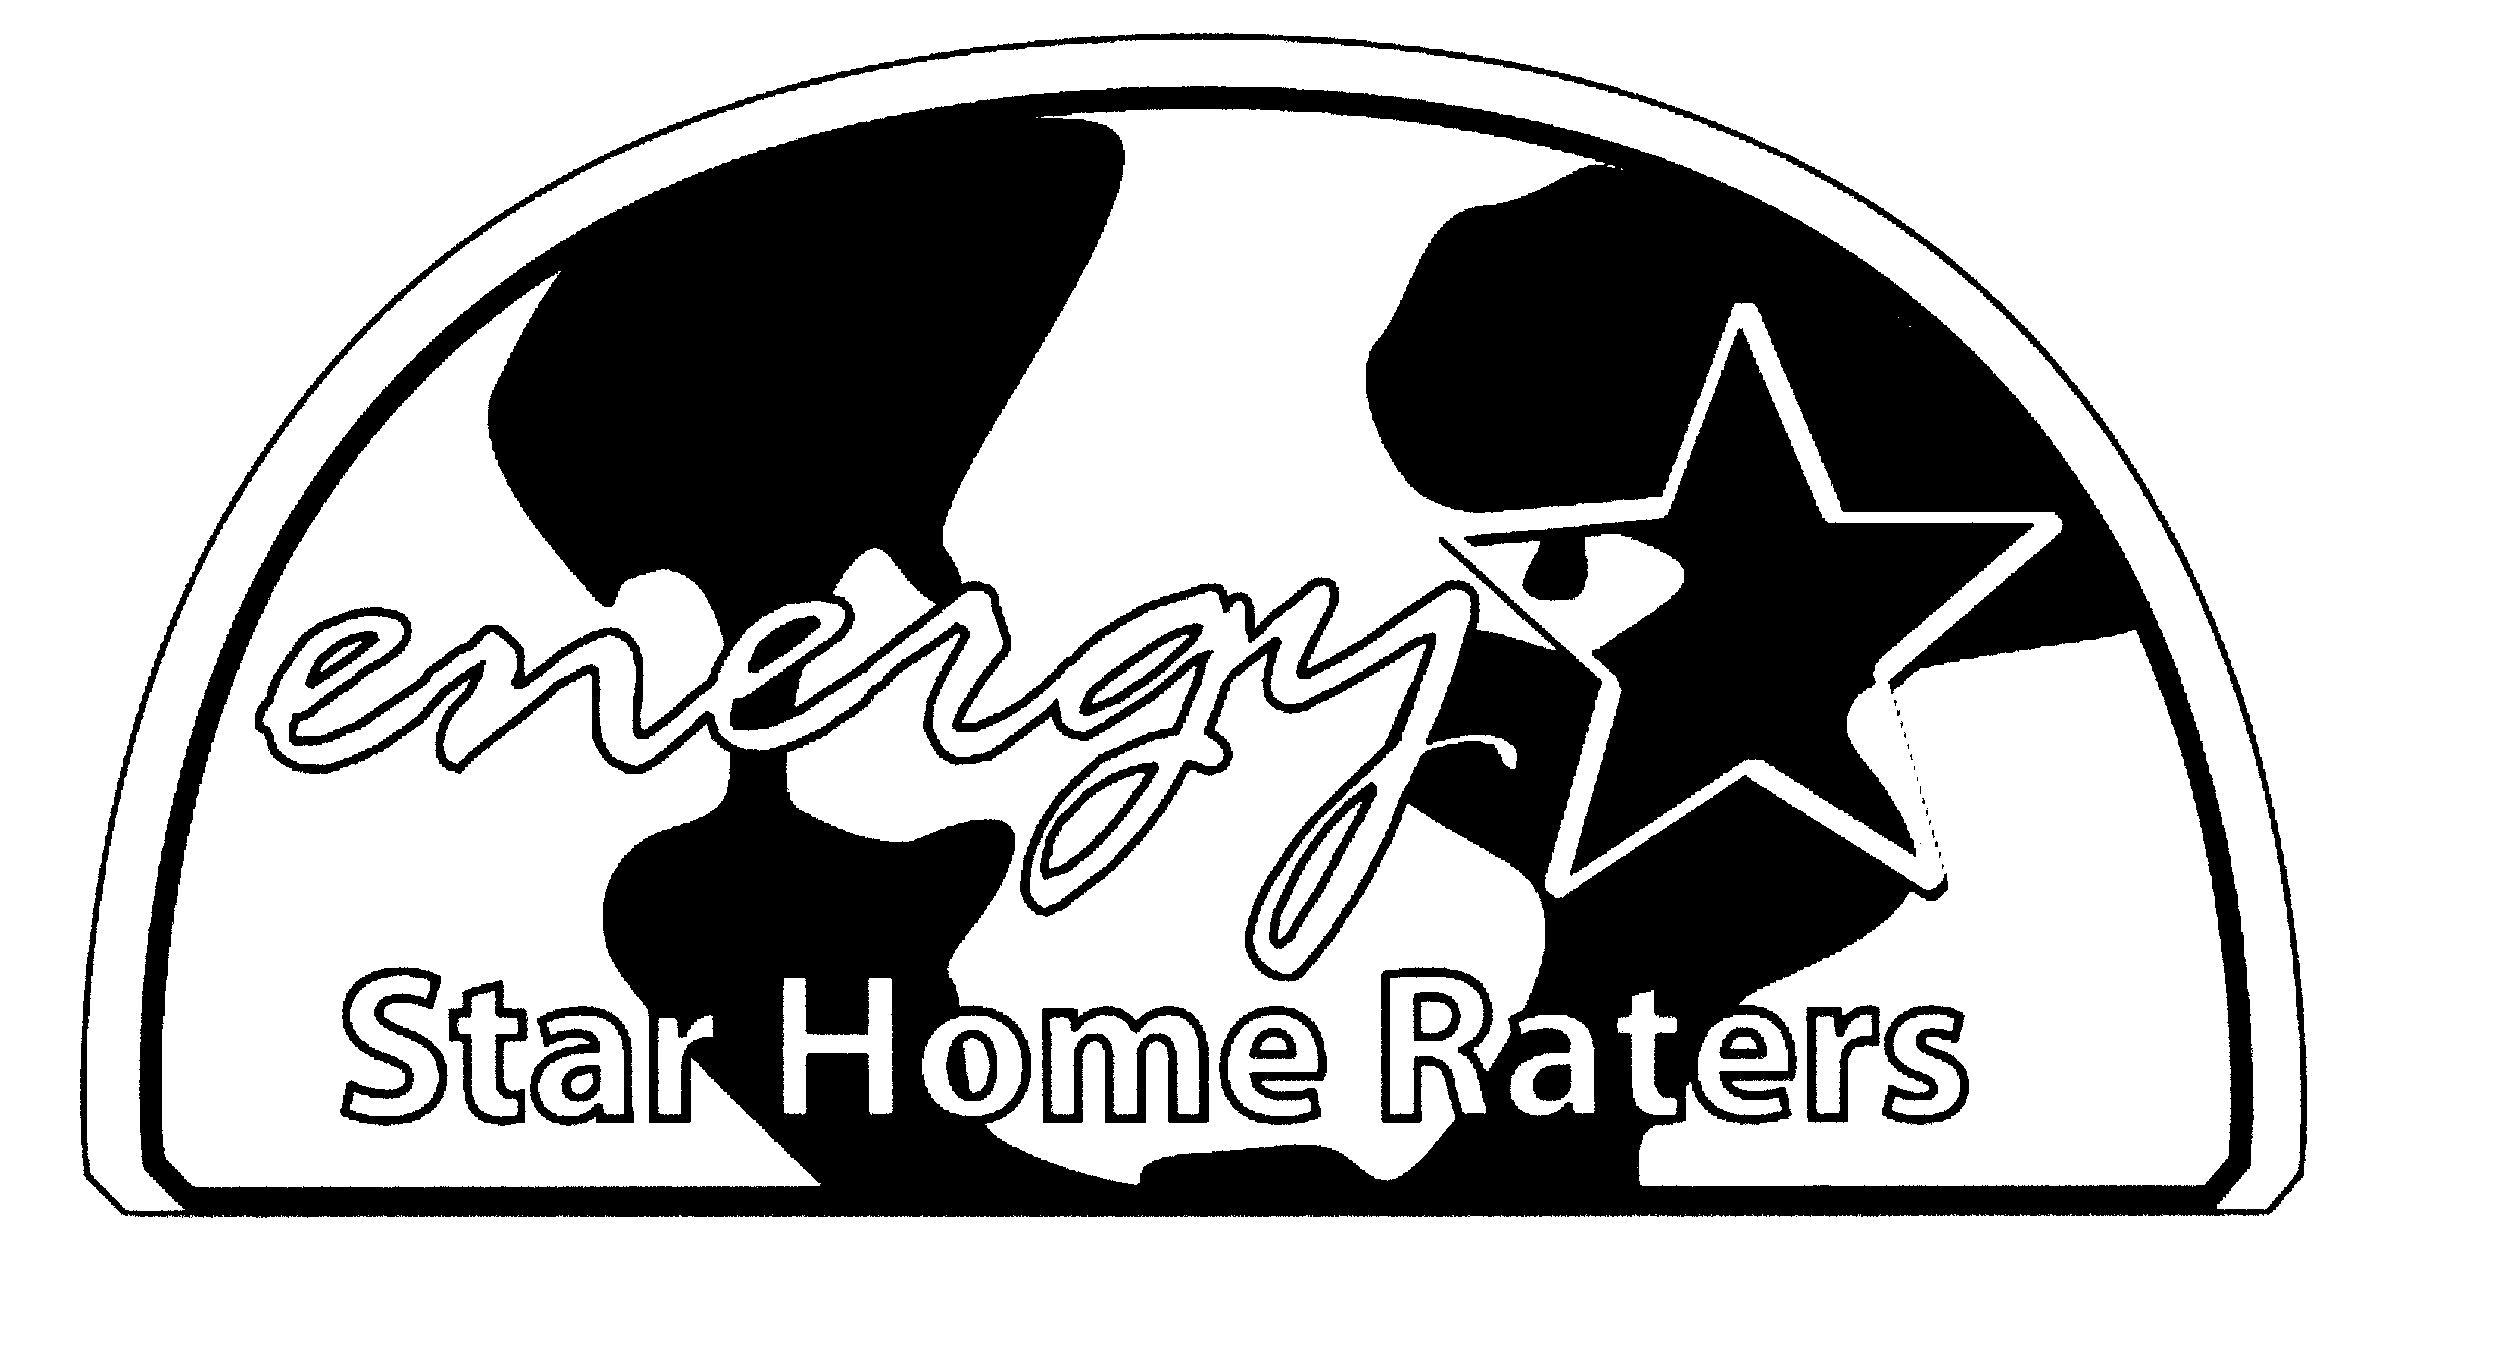  ENERGY STAR HOME RATERS